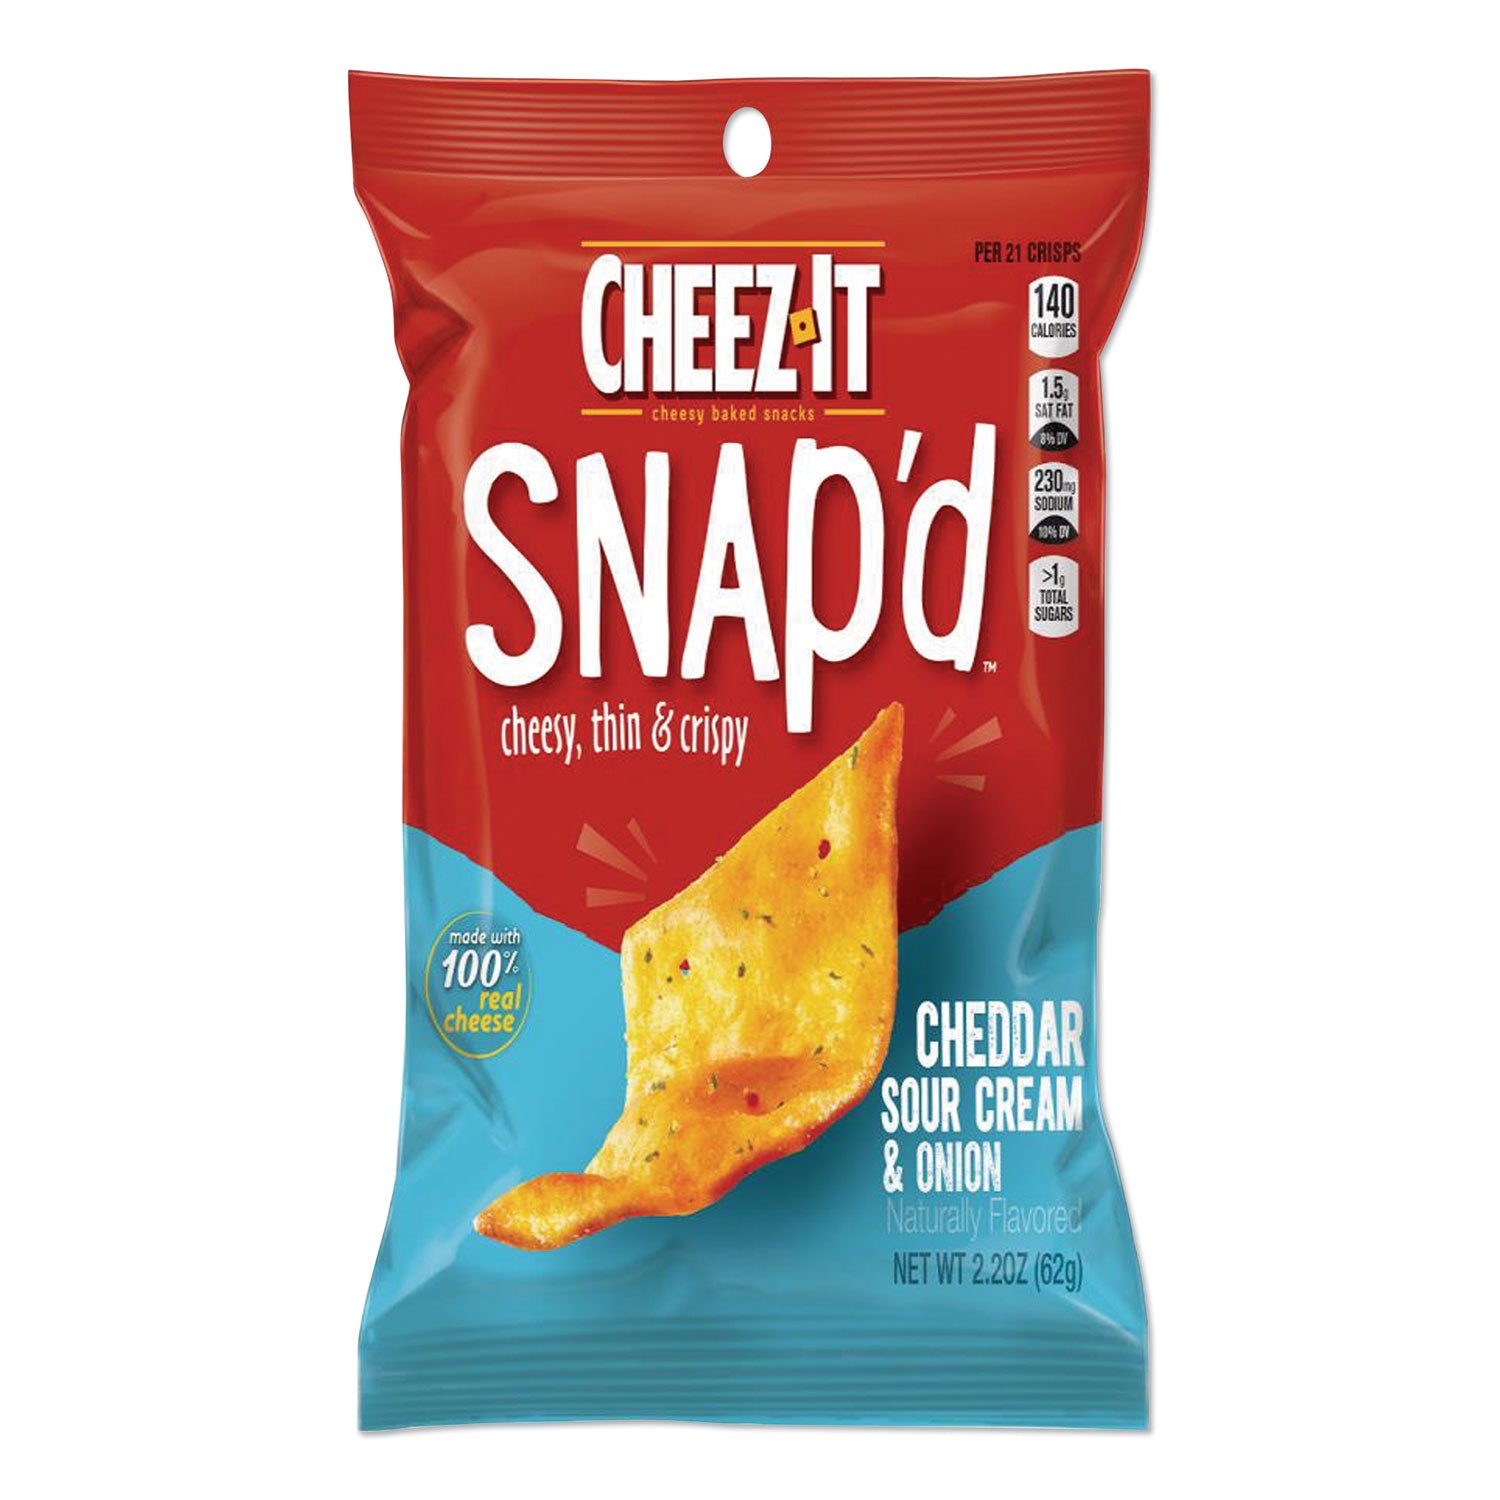 cheez-it-snapd-crackers-cheddar-sour-cream-and-onion-22-oz-pouch-6-pack_keb11460 - 1